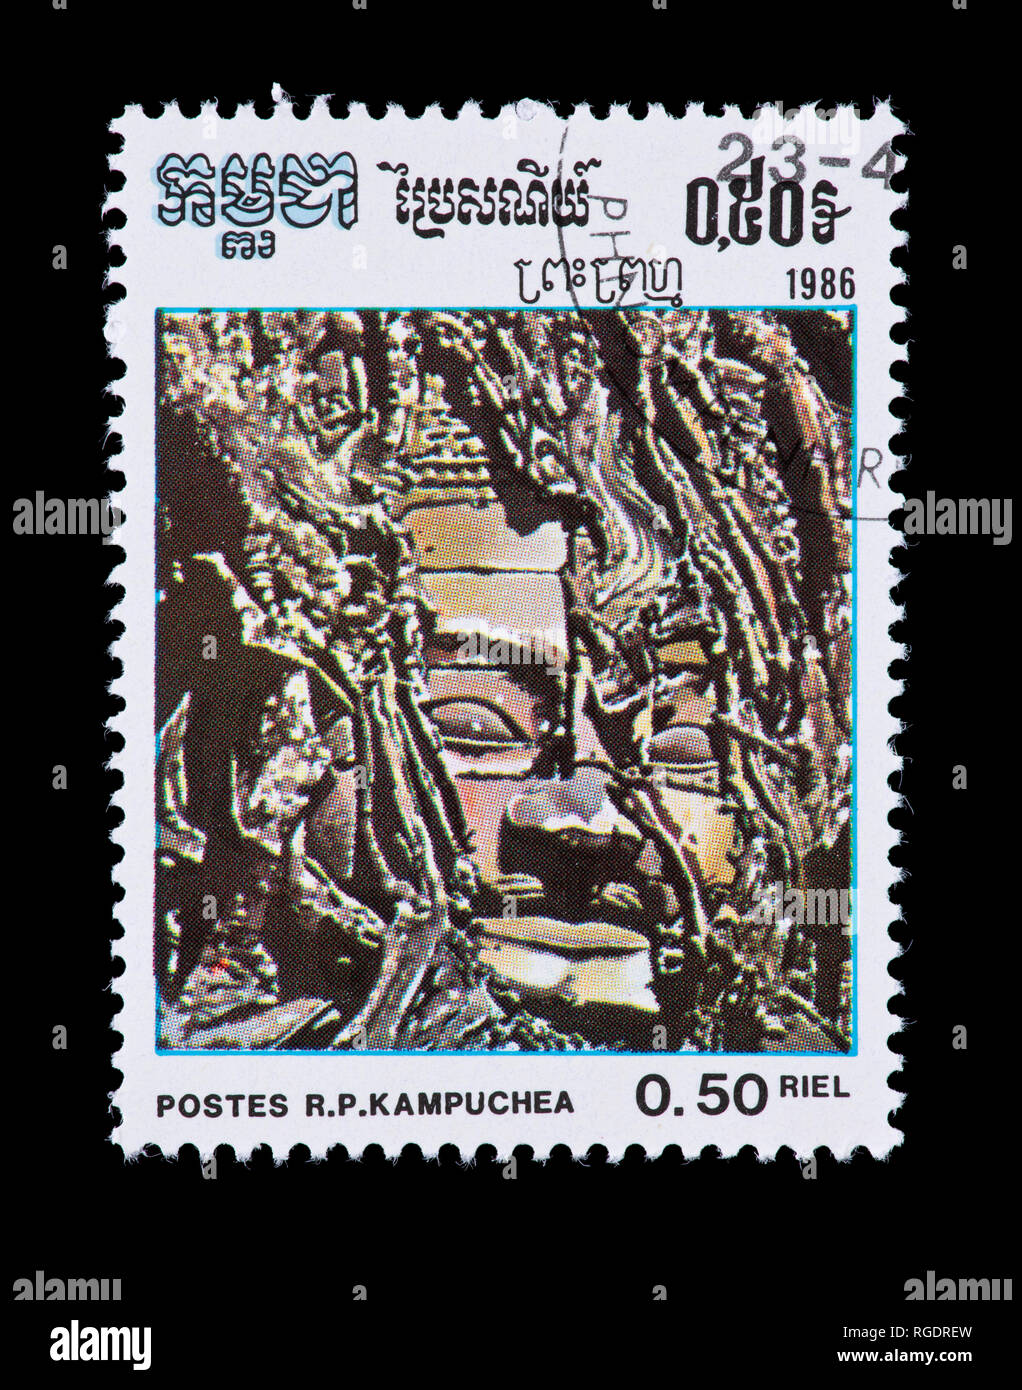 Postage stamp from Cambodia (Kampuchea) depicting a Buddha head,  celebrating Khmer culture. Stock Photo